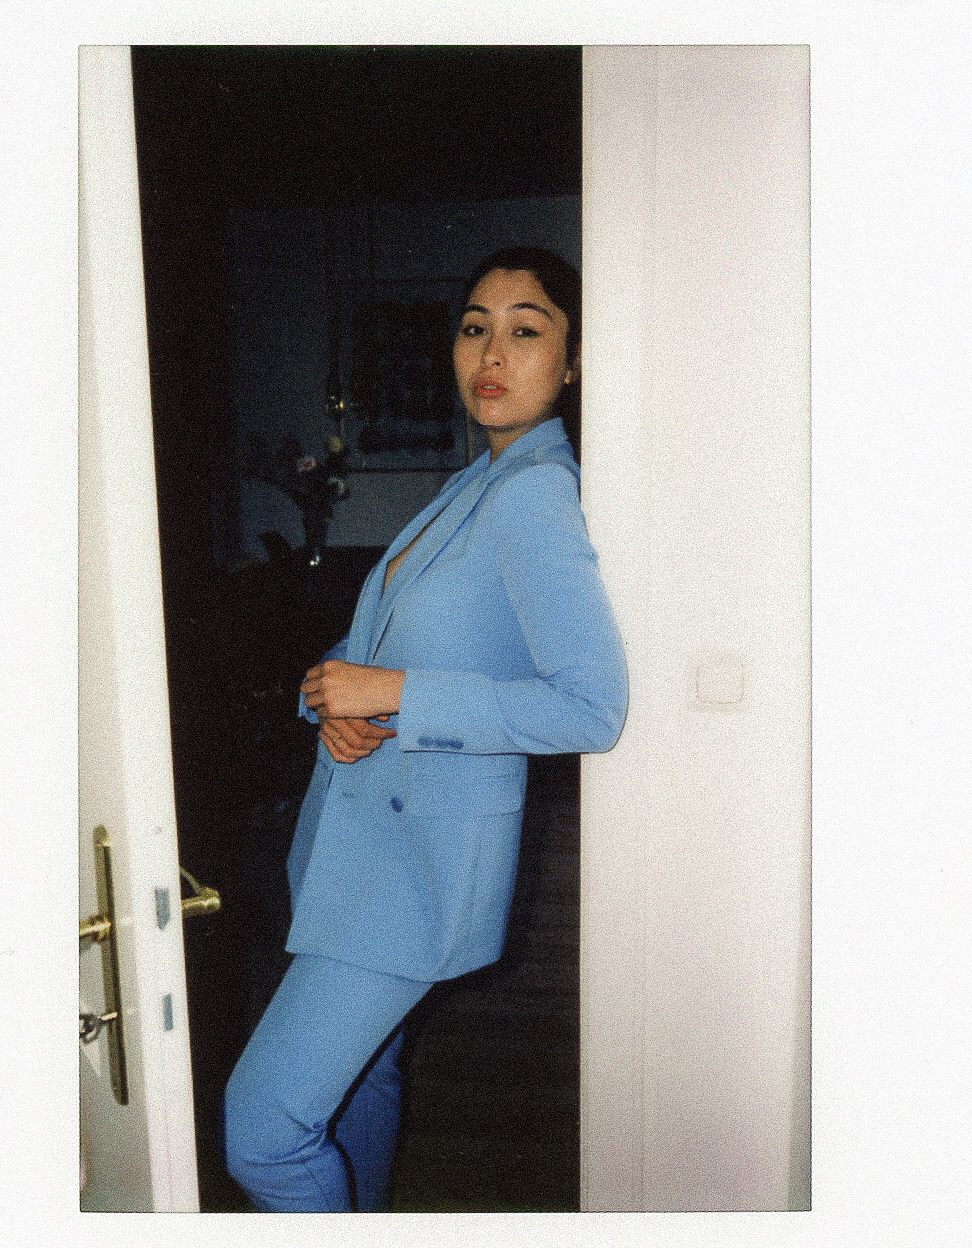 IN A POWDER BLUE SUIT